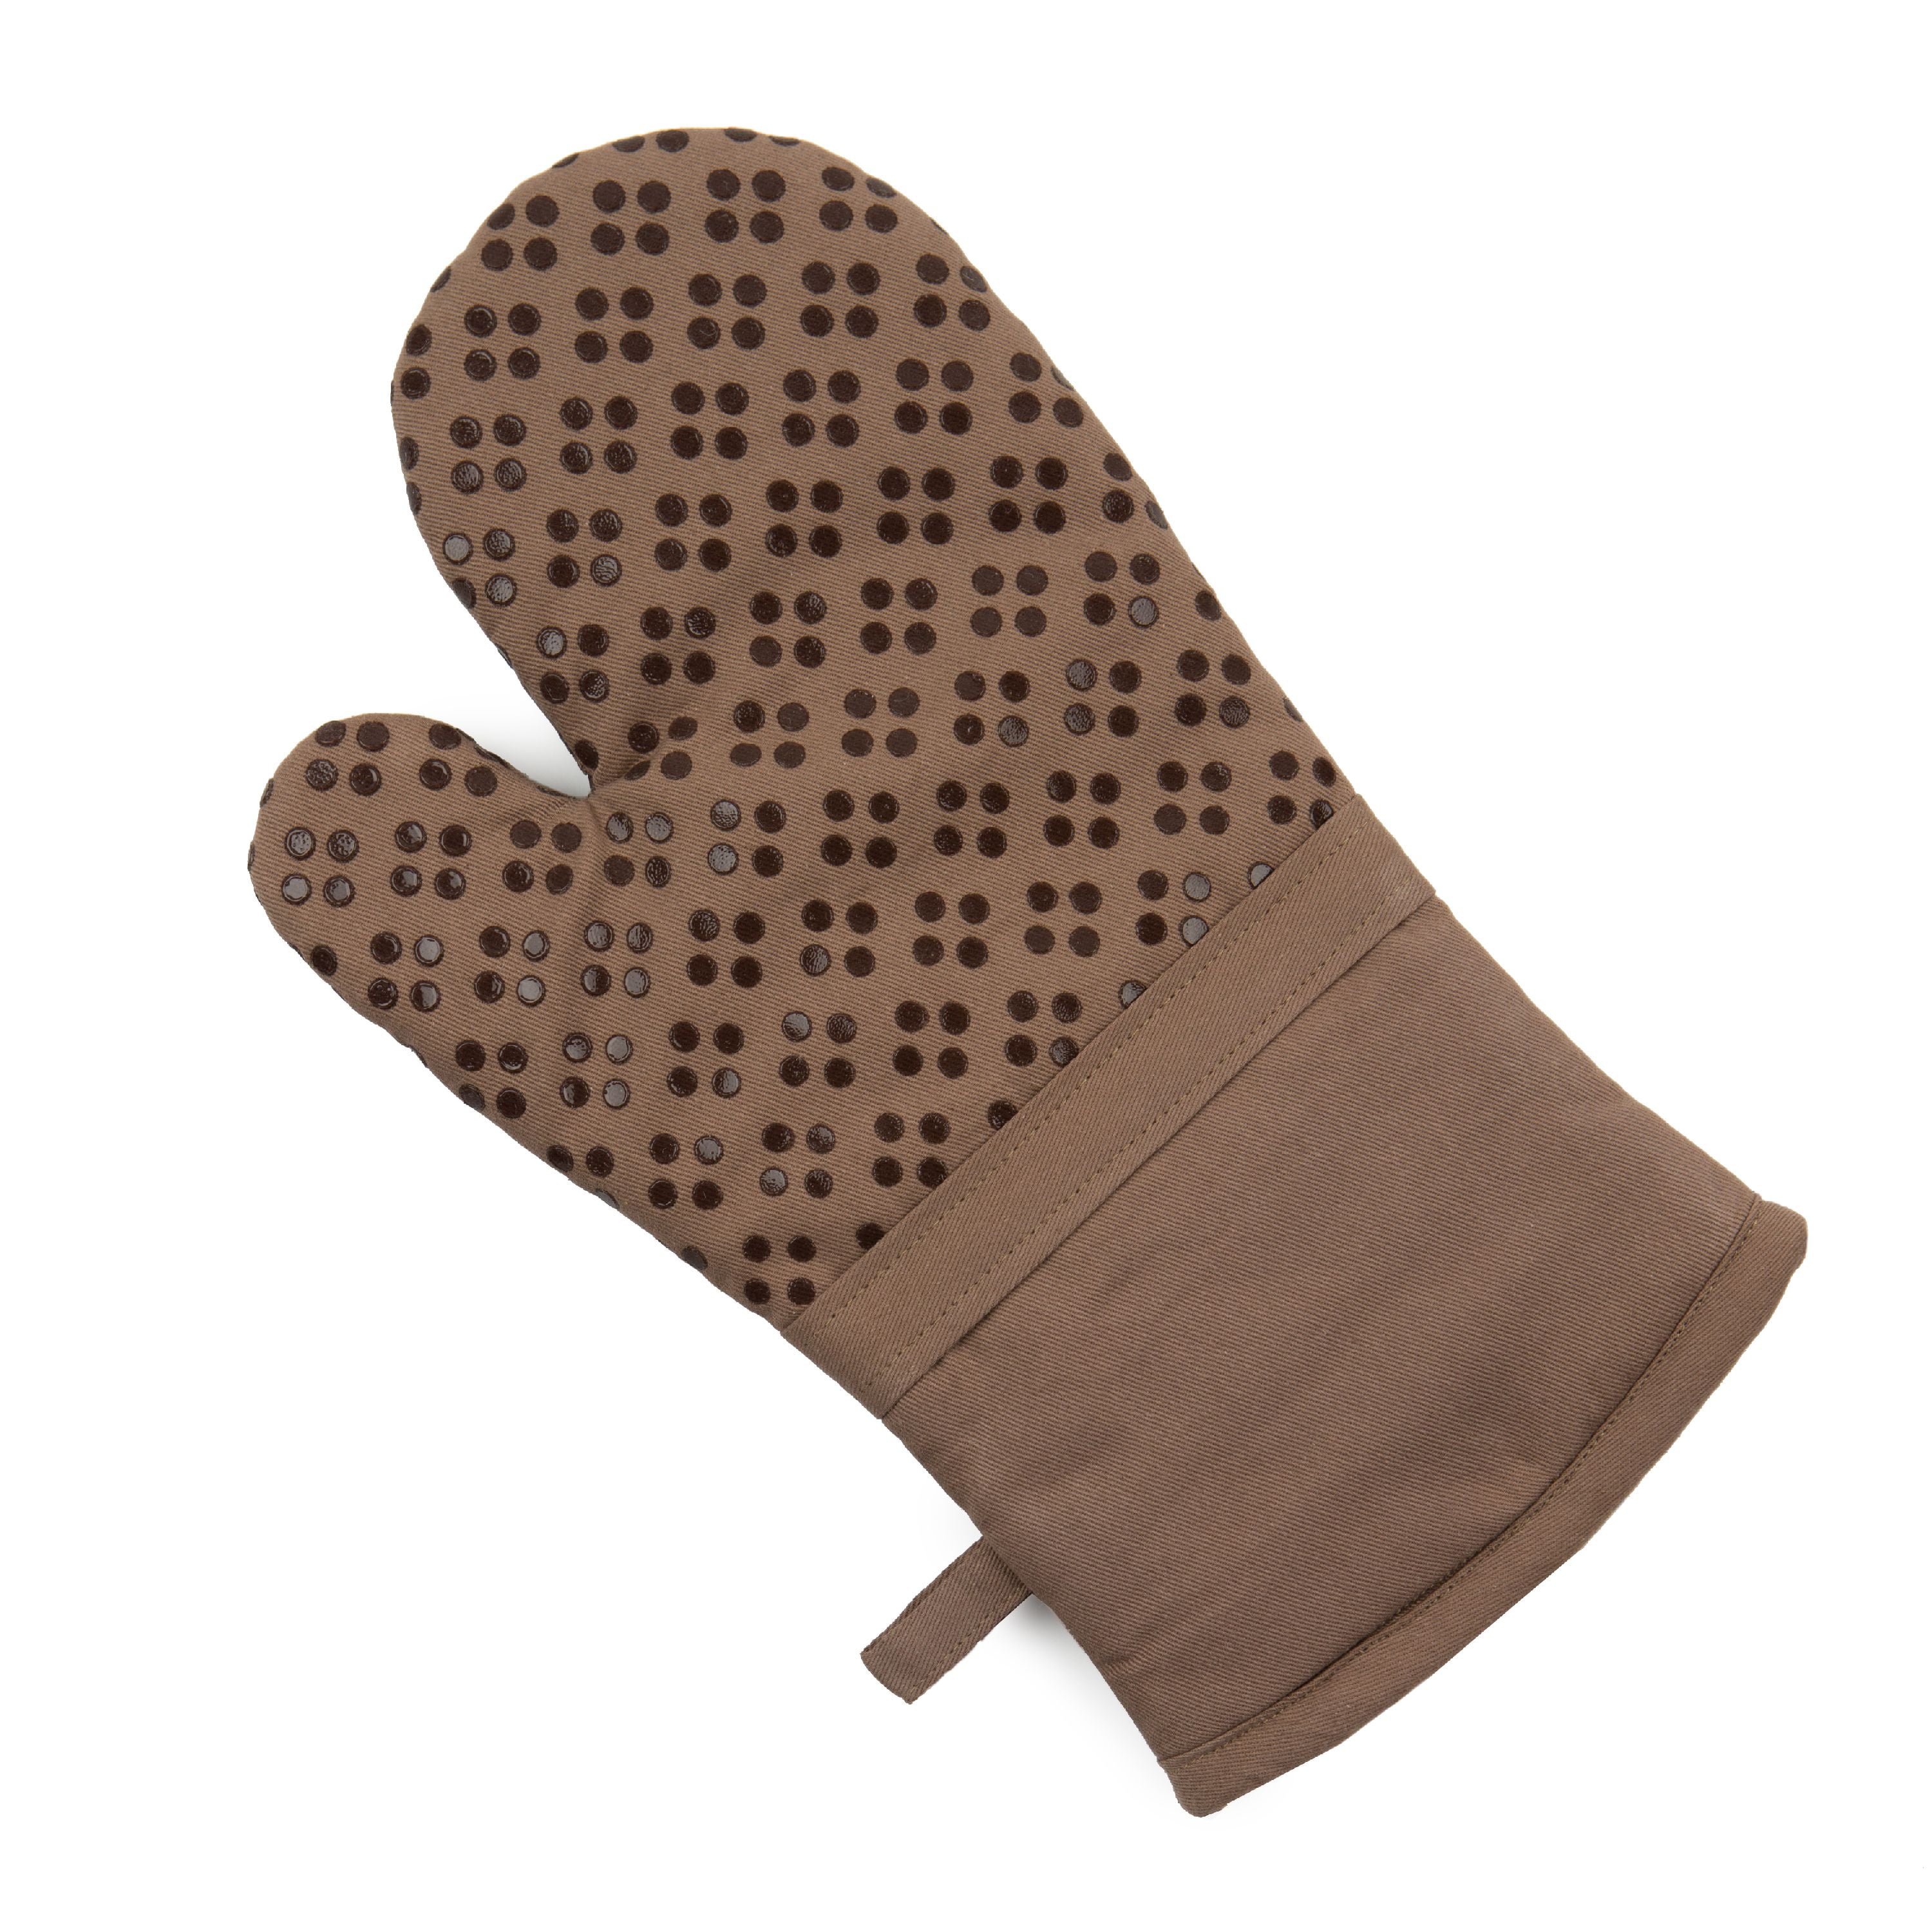 Calphalon Kitchen Towels, Dish Cloths, Oven Mitts For $50 In